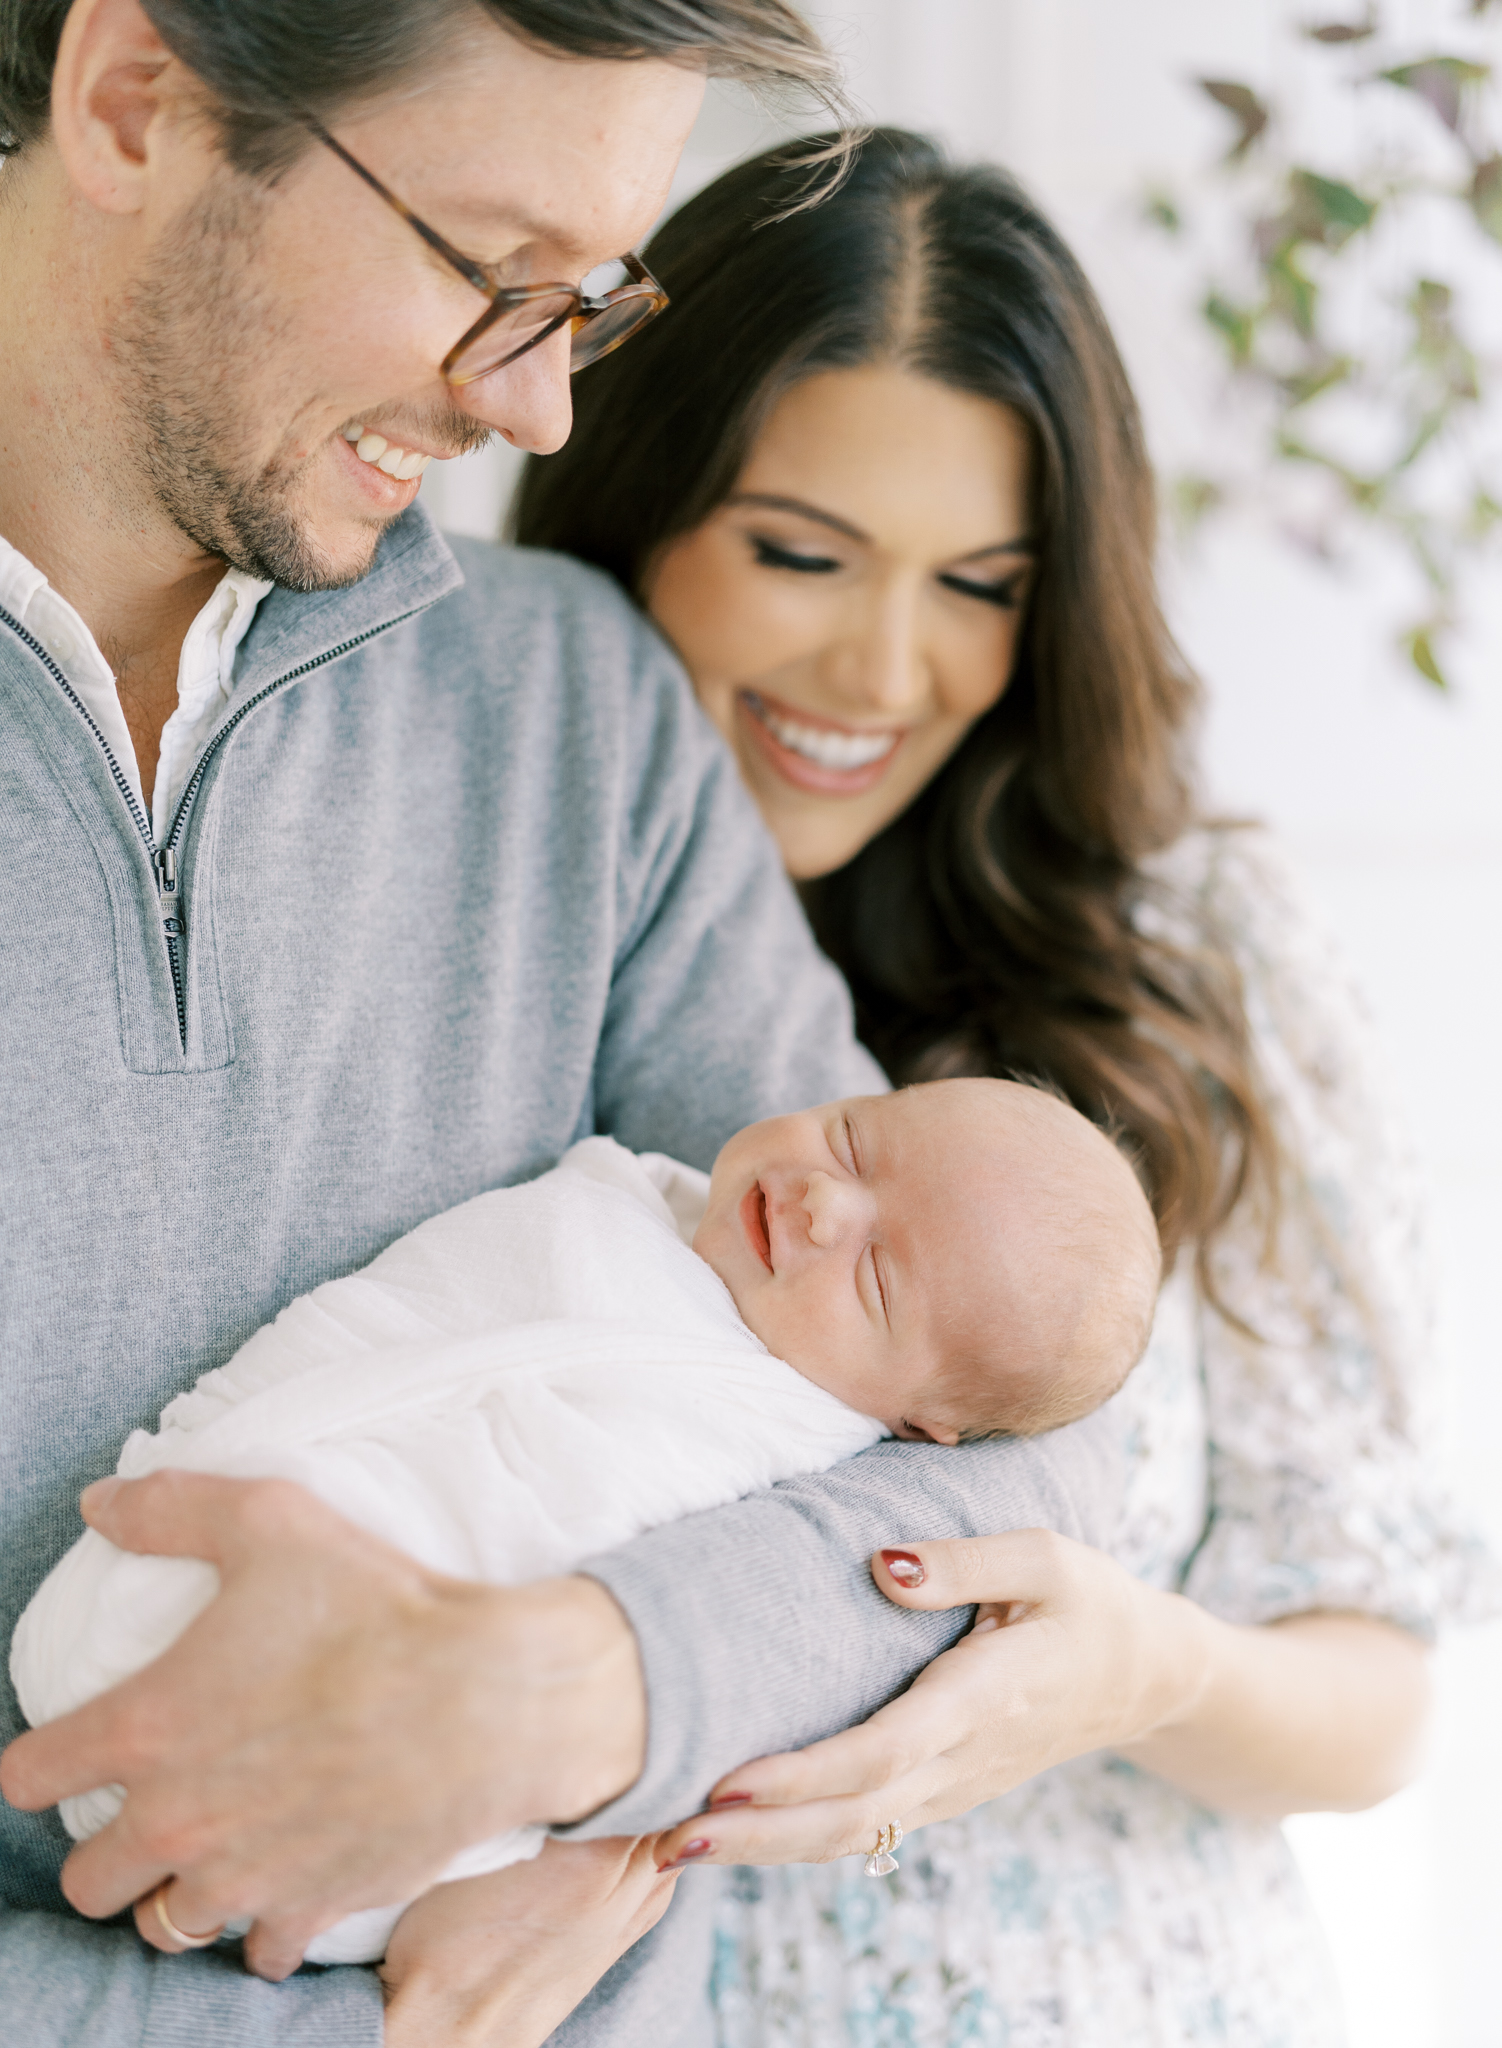 Newborn baby boy smiling in the arms of his parents during photoshoot in Atlanta.